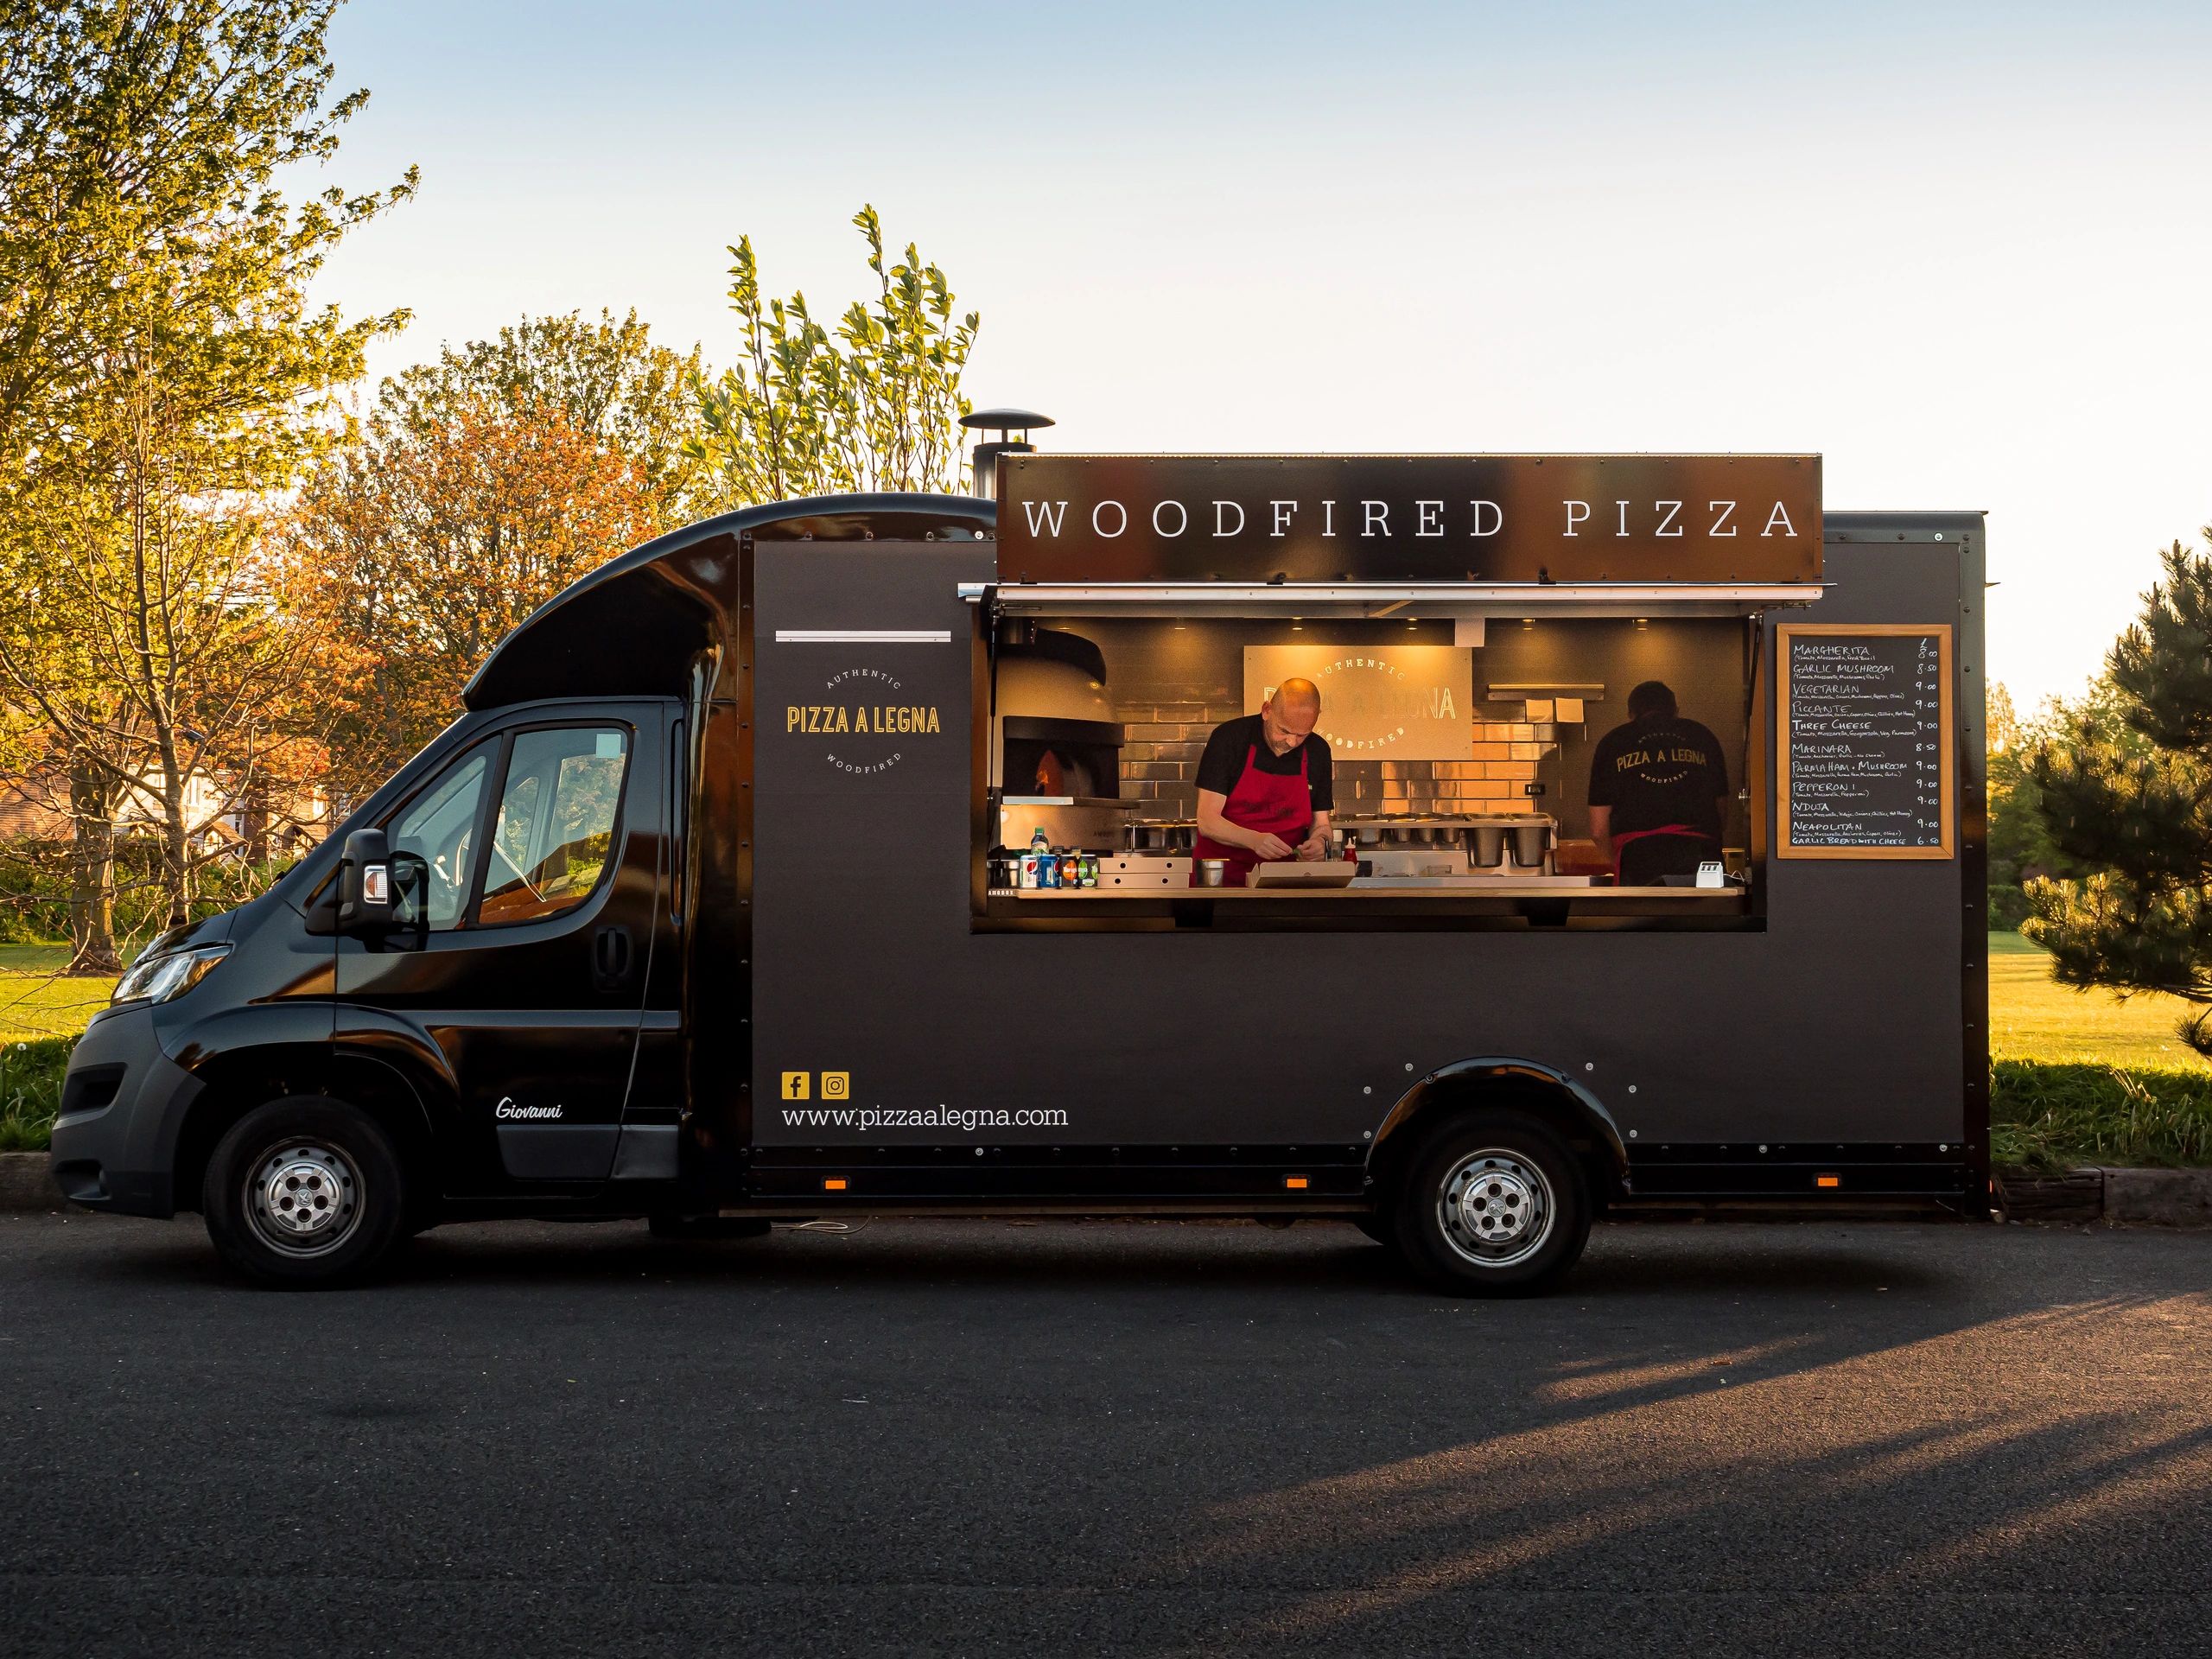 Pizza A Legna - Woodfired Pizza, Food Truck, Neopolitan Style Pizza